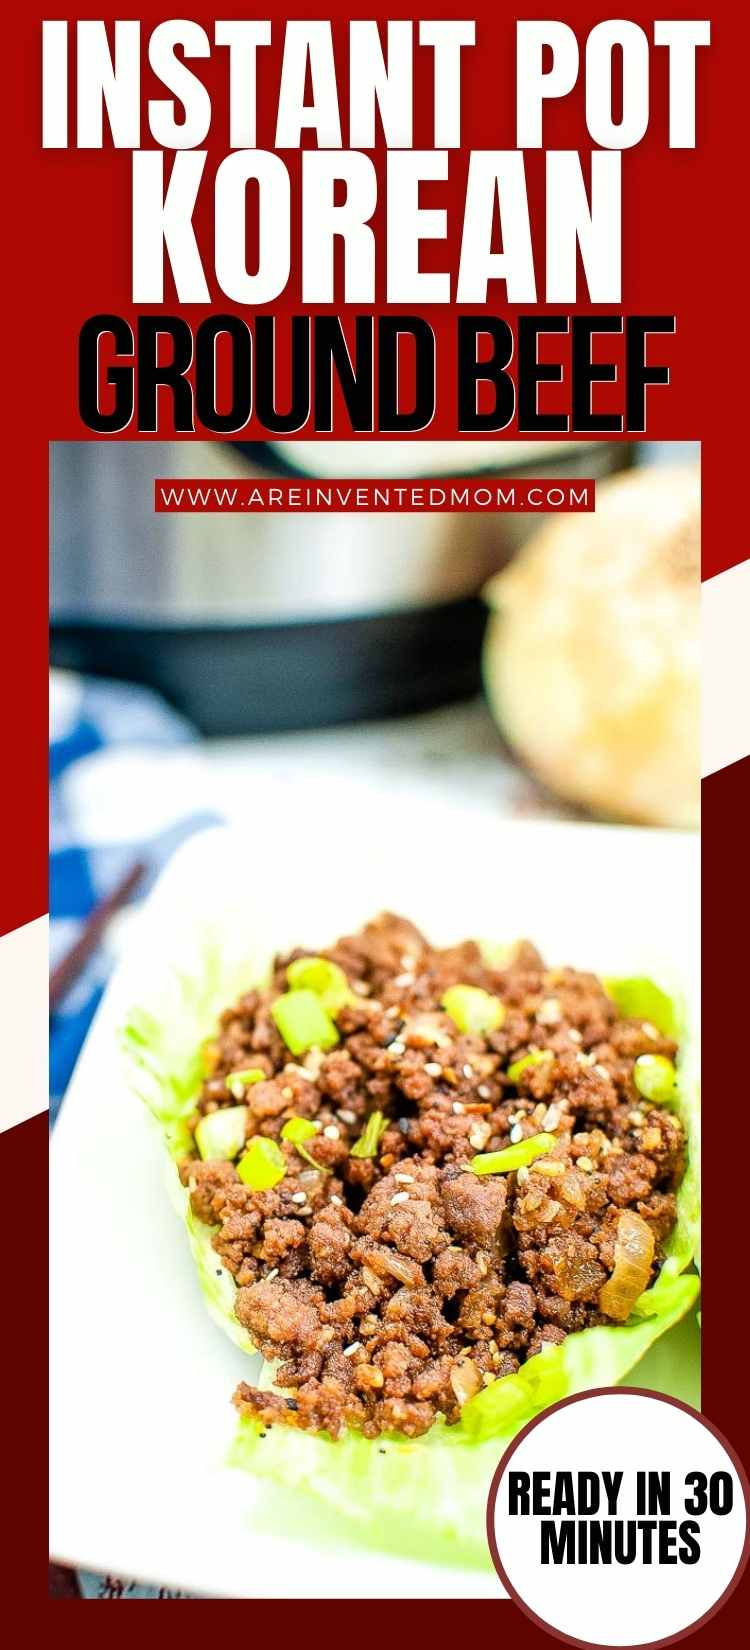 Instant Pot Korean ground beef in a lettuce cup with text overlay